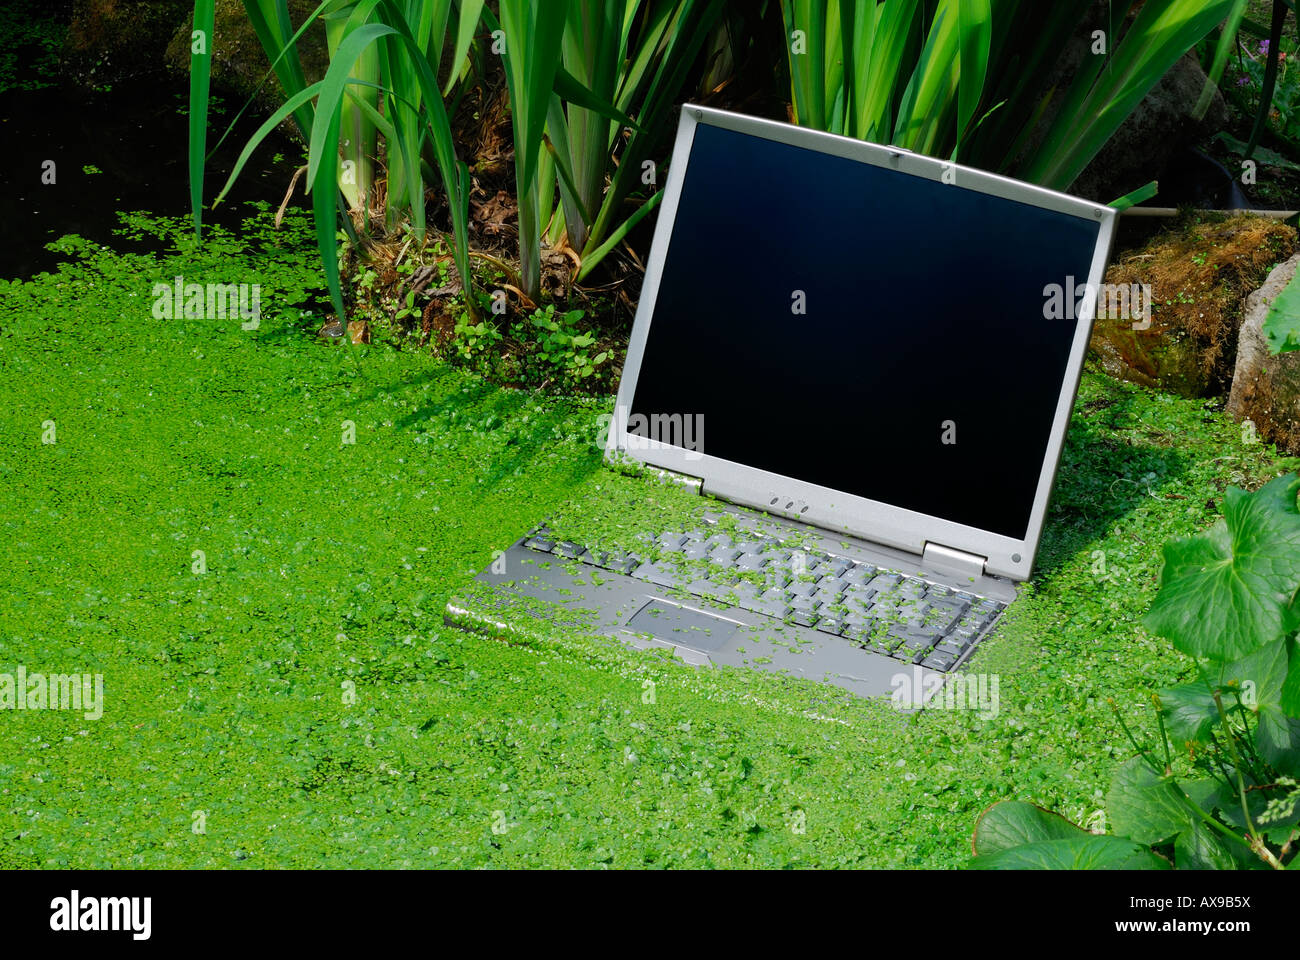 Laptop sinking in weed filled water Stock Photo